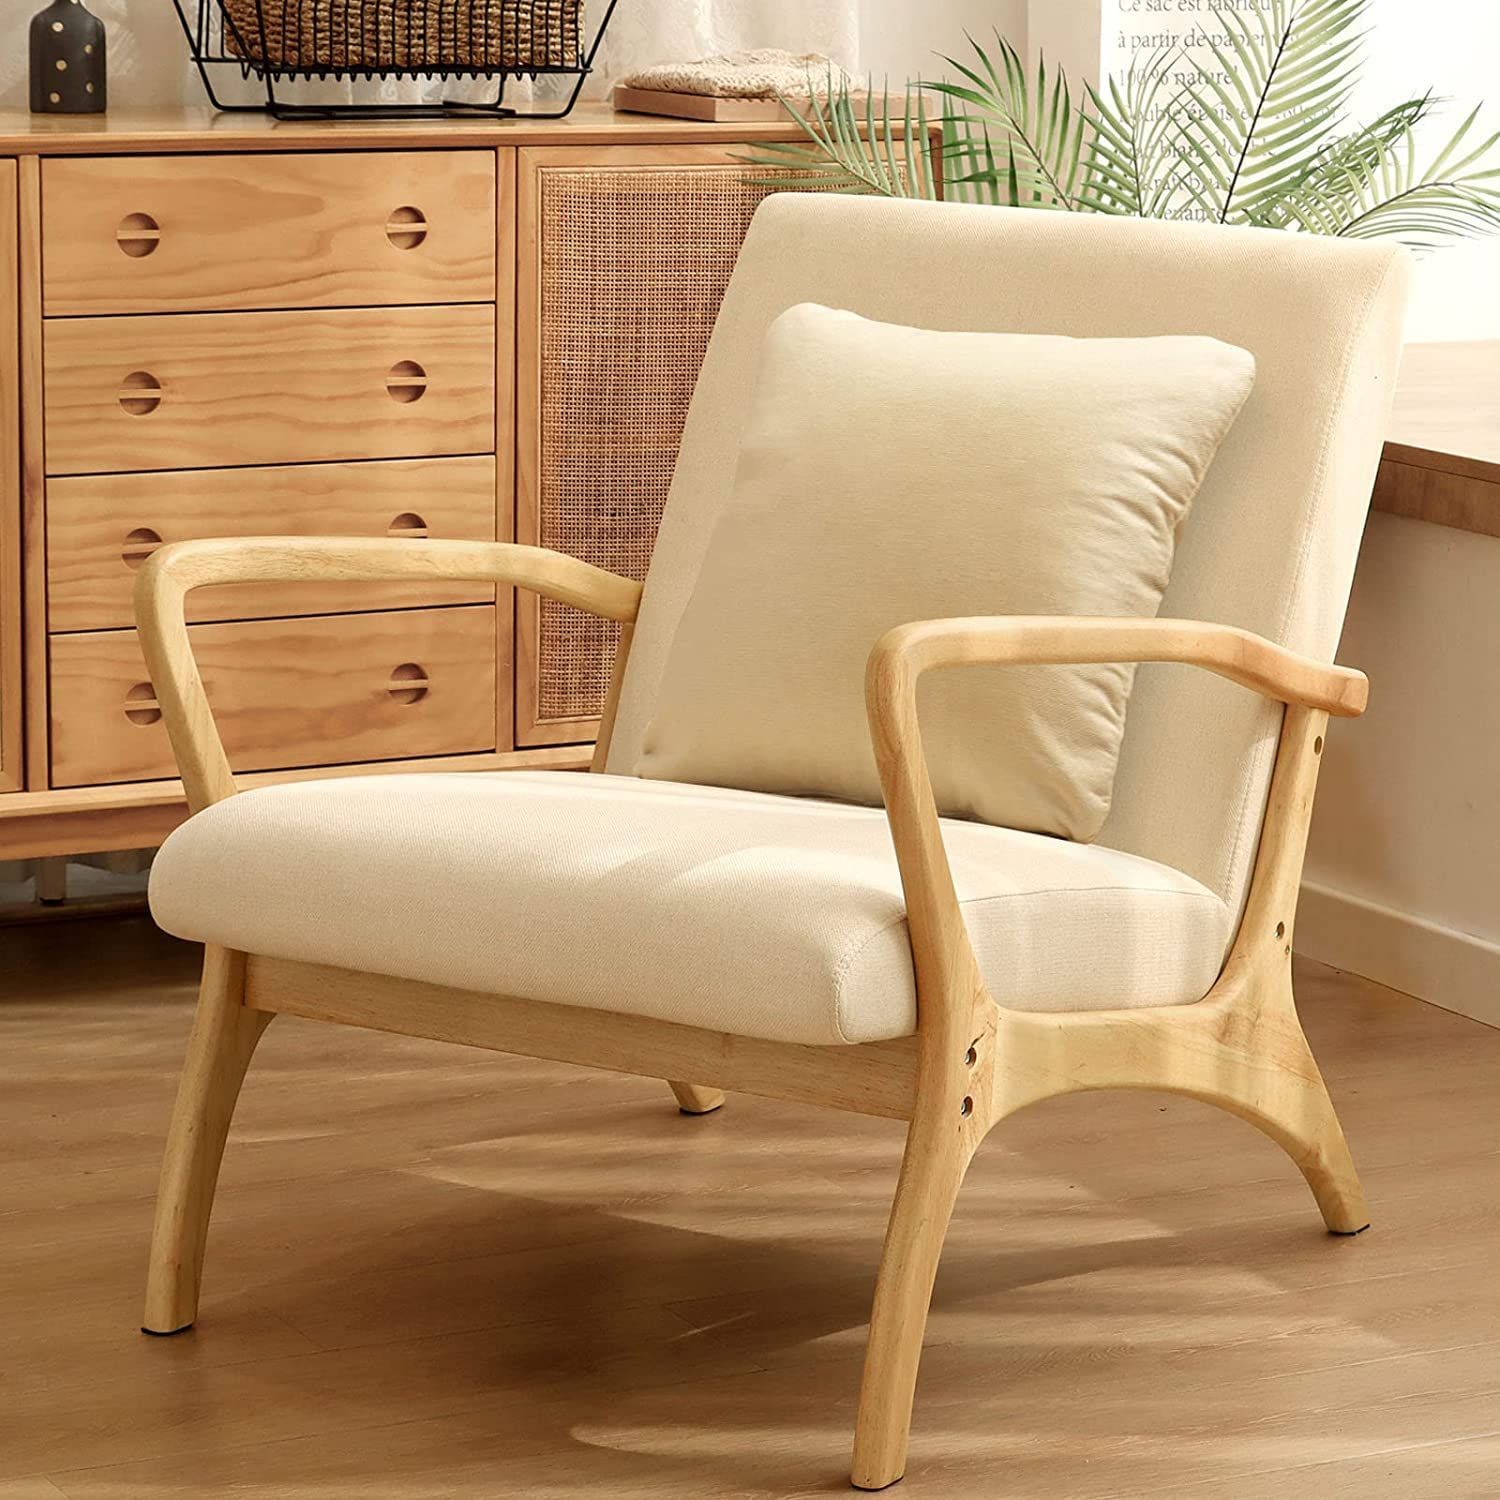 beige cushioned chair with wooden handles and legs